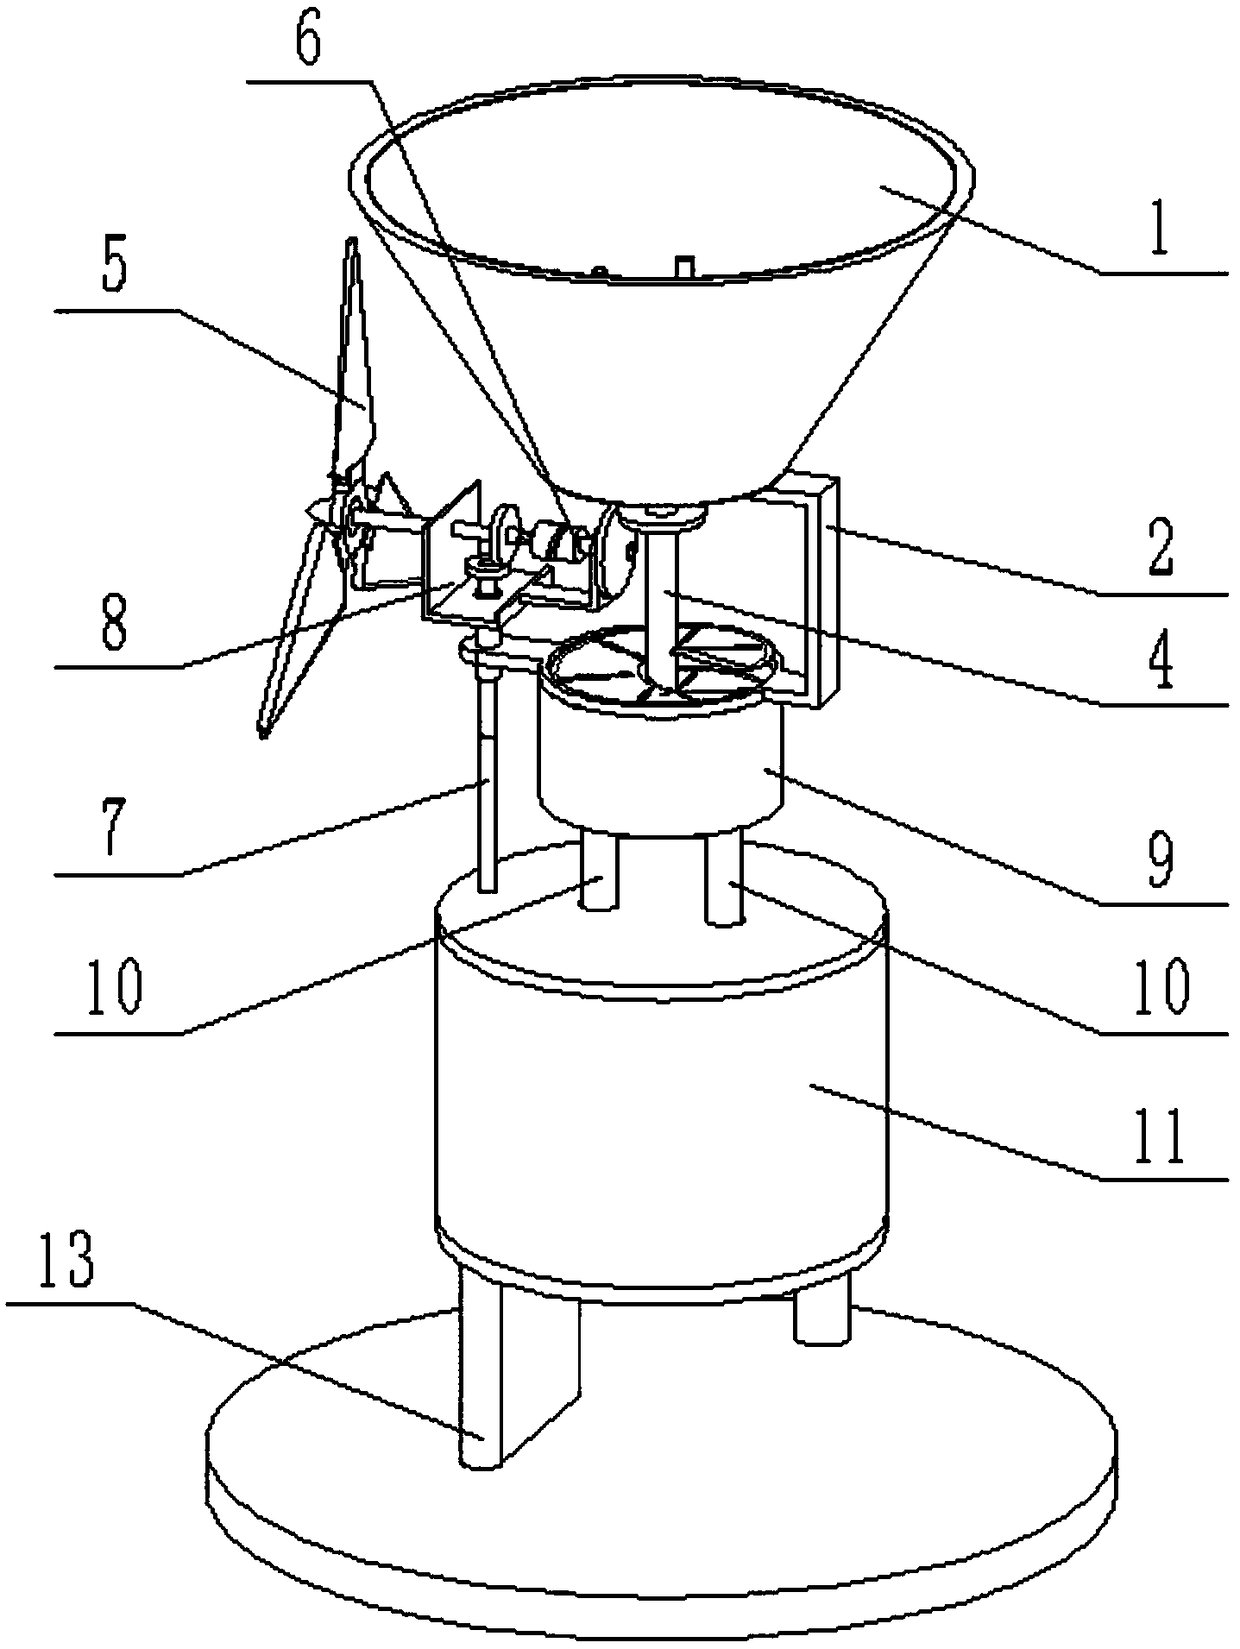 Rainwater filtering, purifying and utilizing device